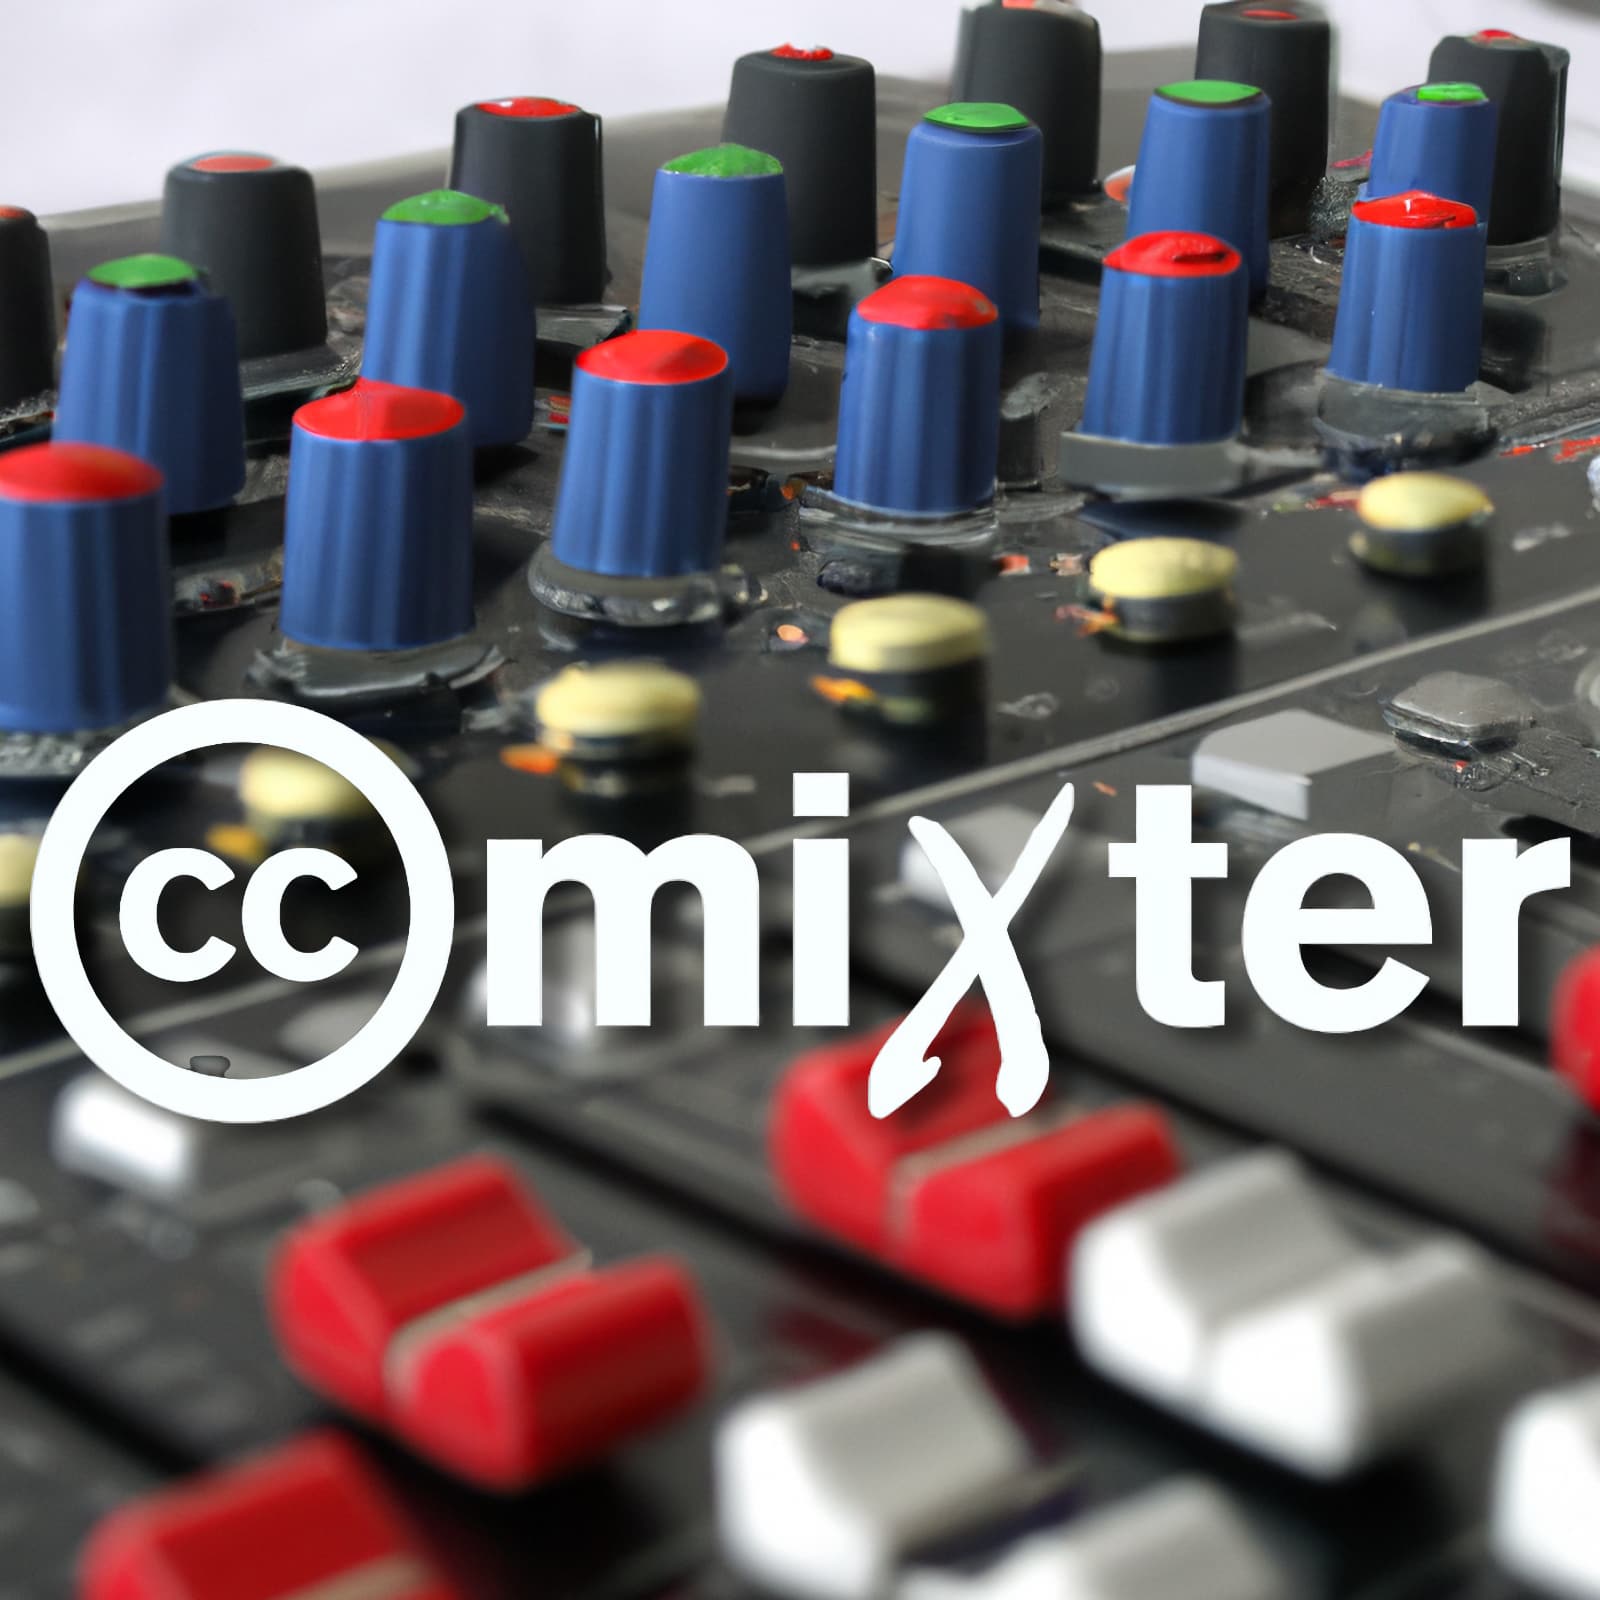 CC mixter – legally mashup people’s tracks!